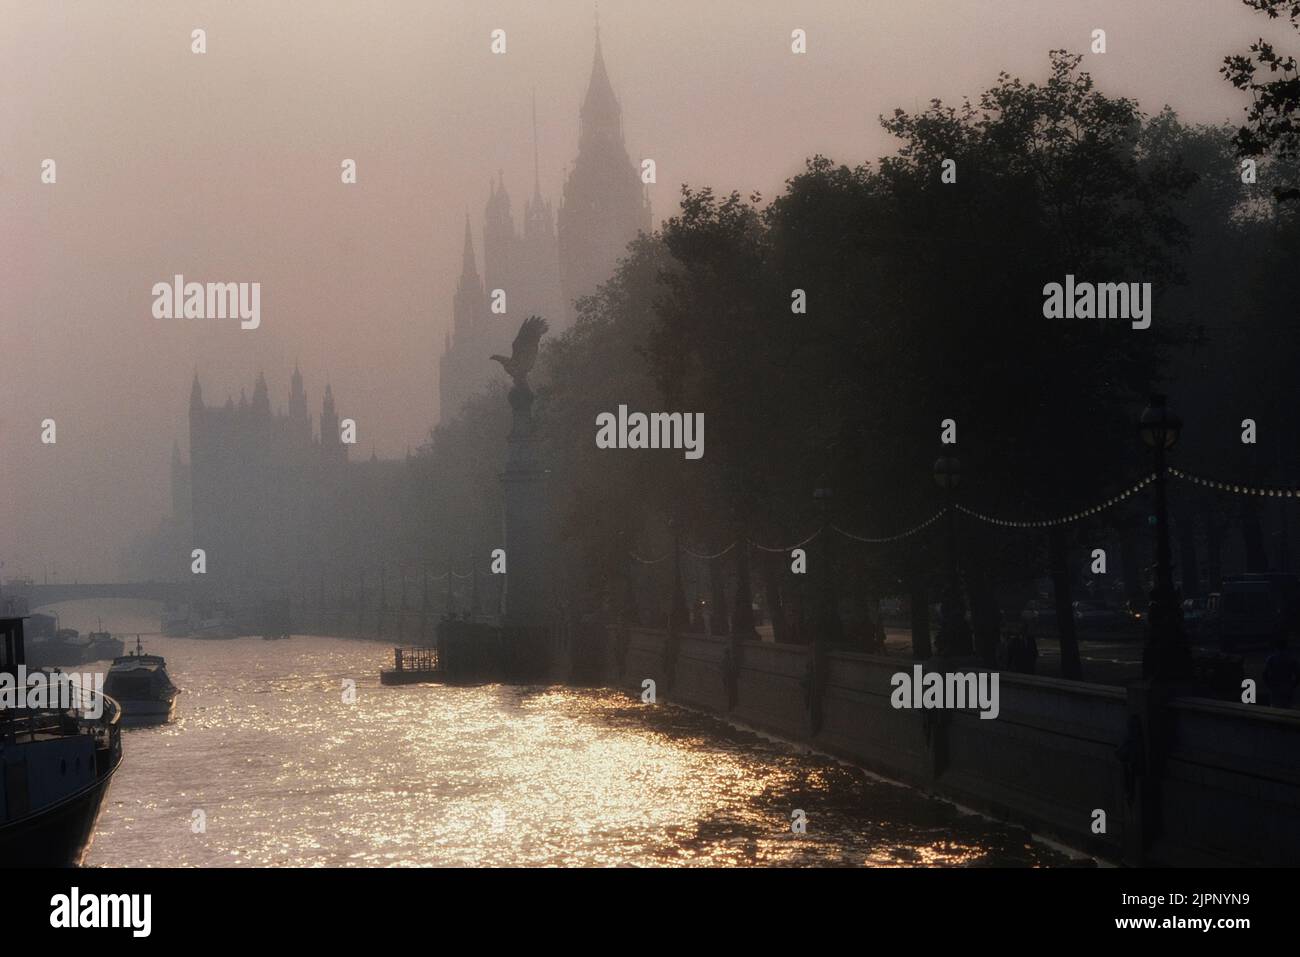 Atmospheric view of The Palace of Westminster / Houses of Parliament, River Thames in the fog looking from The Embankment.  London. England. UK Stock Photo